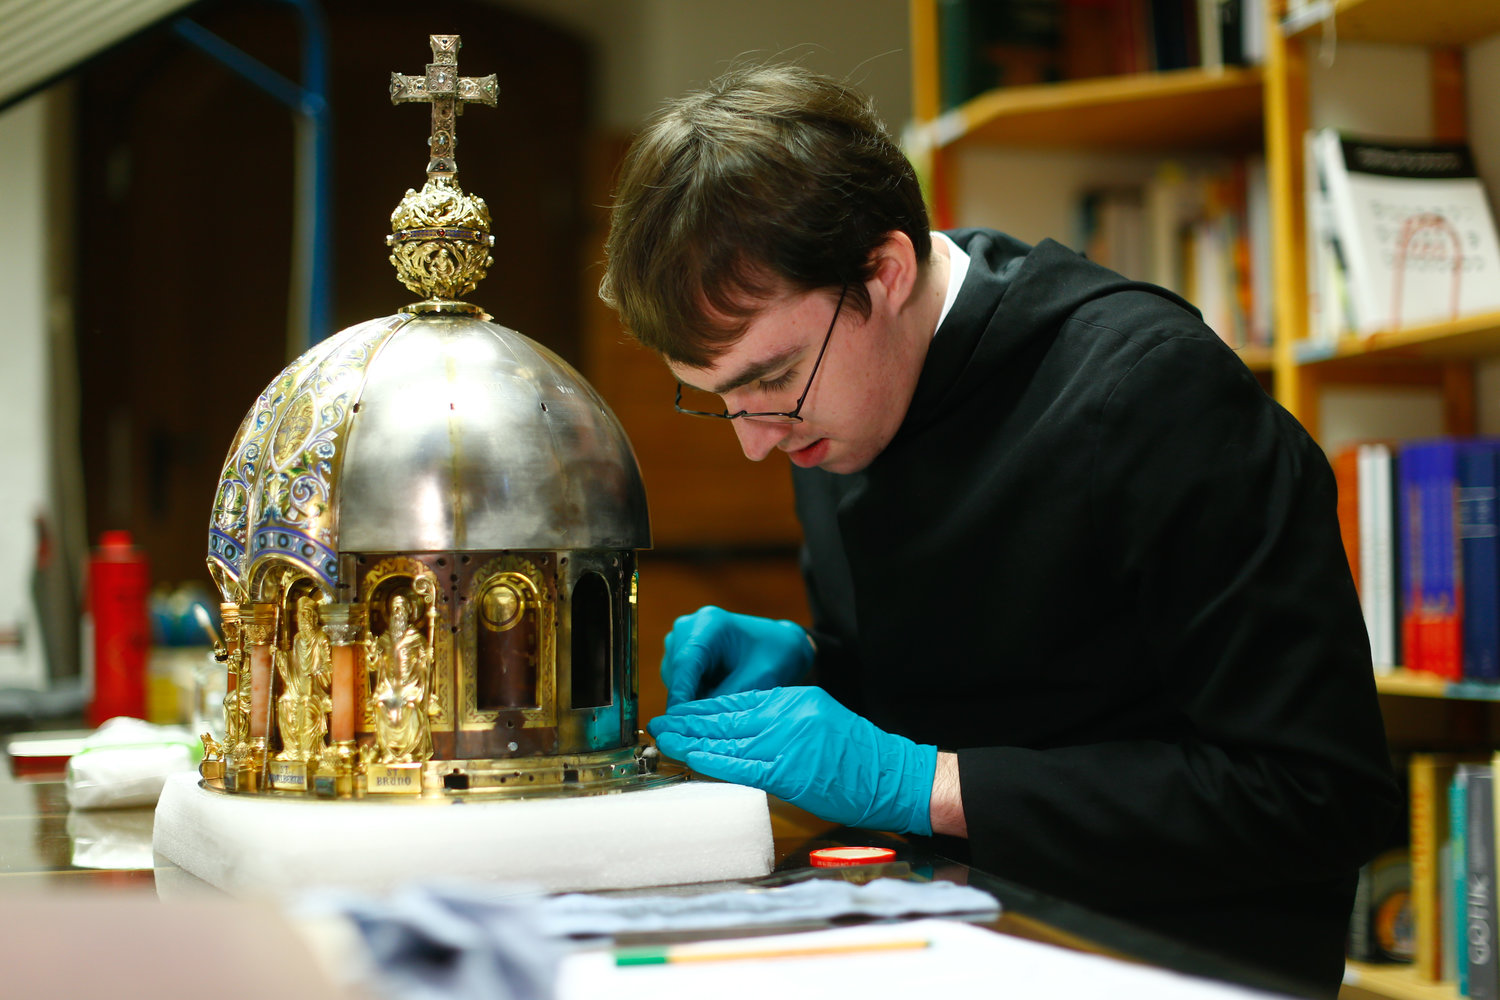 Restorer Luke Jonathan Koeppe cleans part of the shrine with the relics of St. Corona at the cathedral in Aachen, Germany, March 25, 2020, amid the coronavirus pandemic.